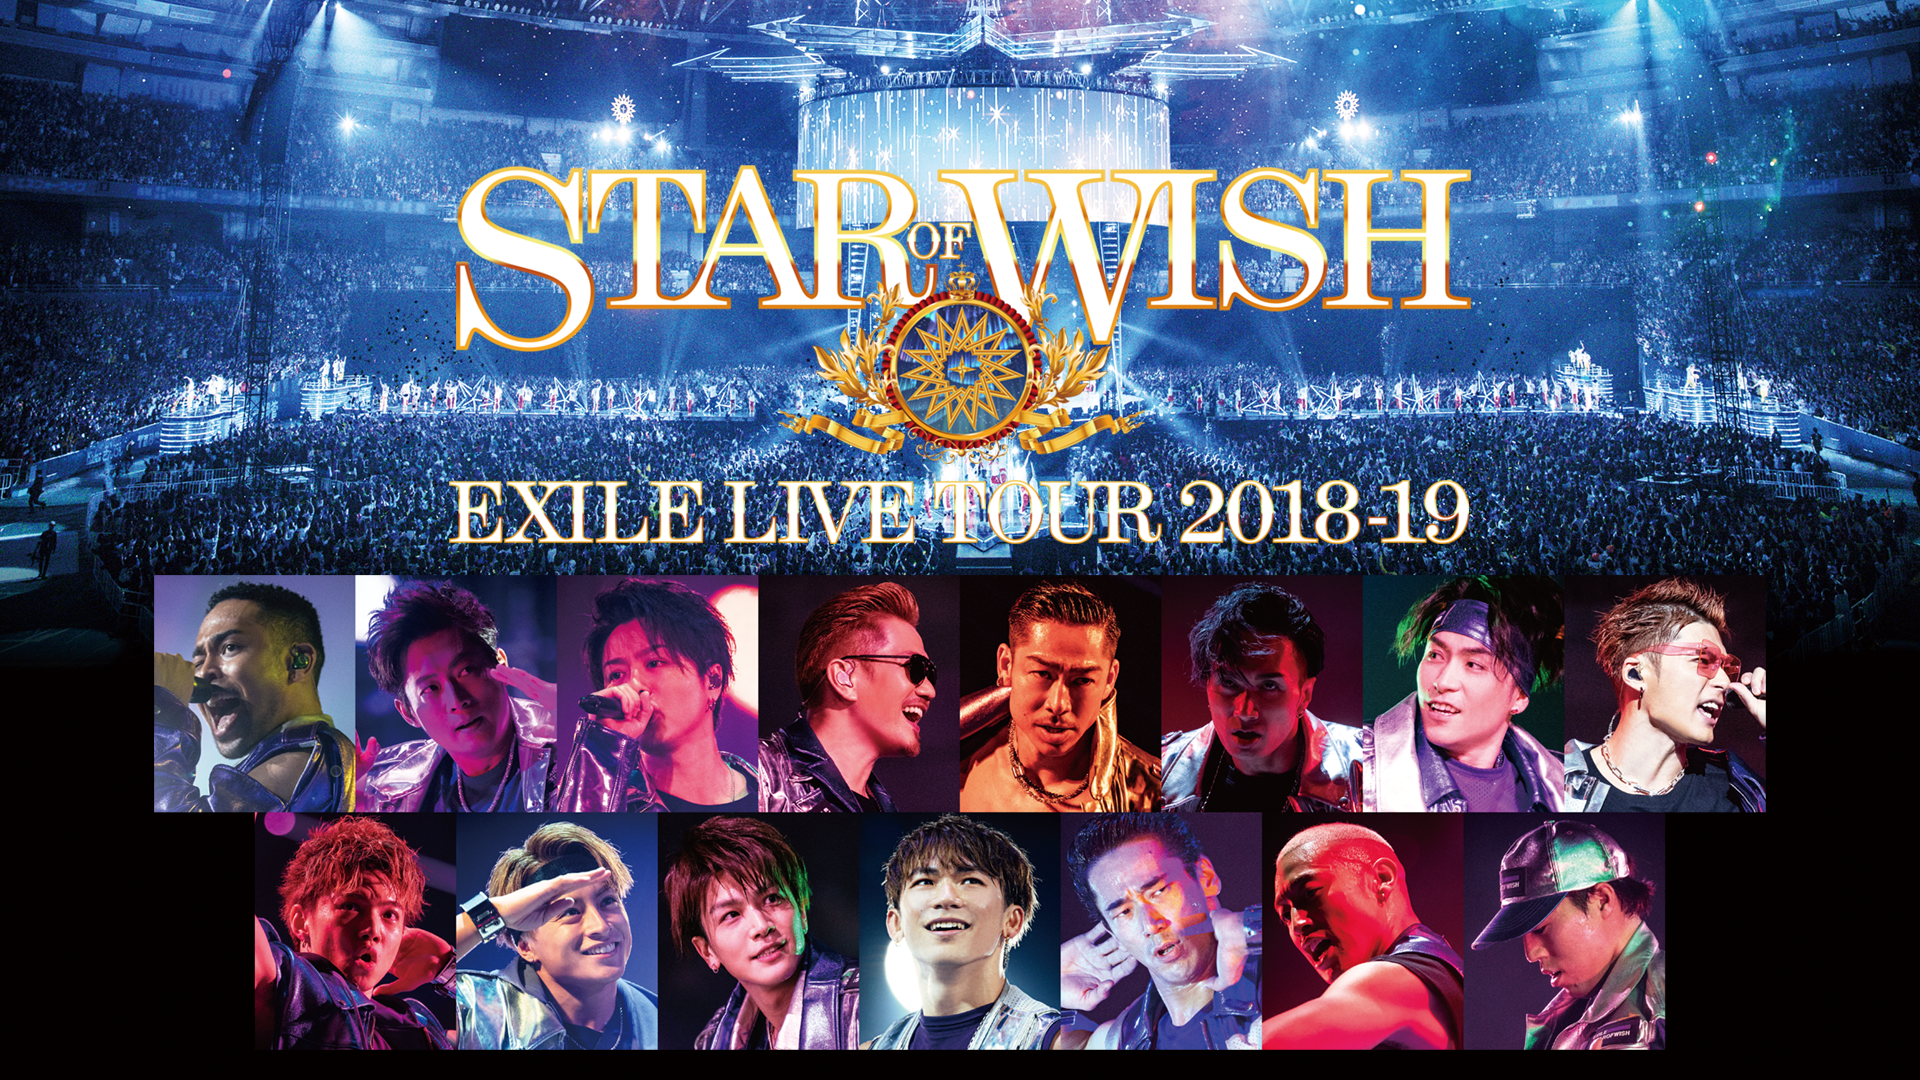 EXILE LIVE TOUR 2018-2019 “STAR OF WISH”(音楽・ライブ / 2019 